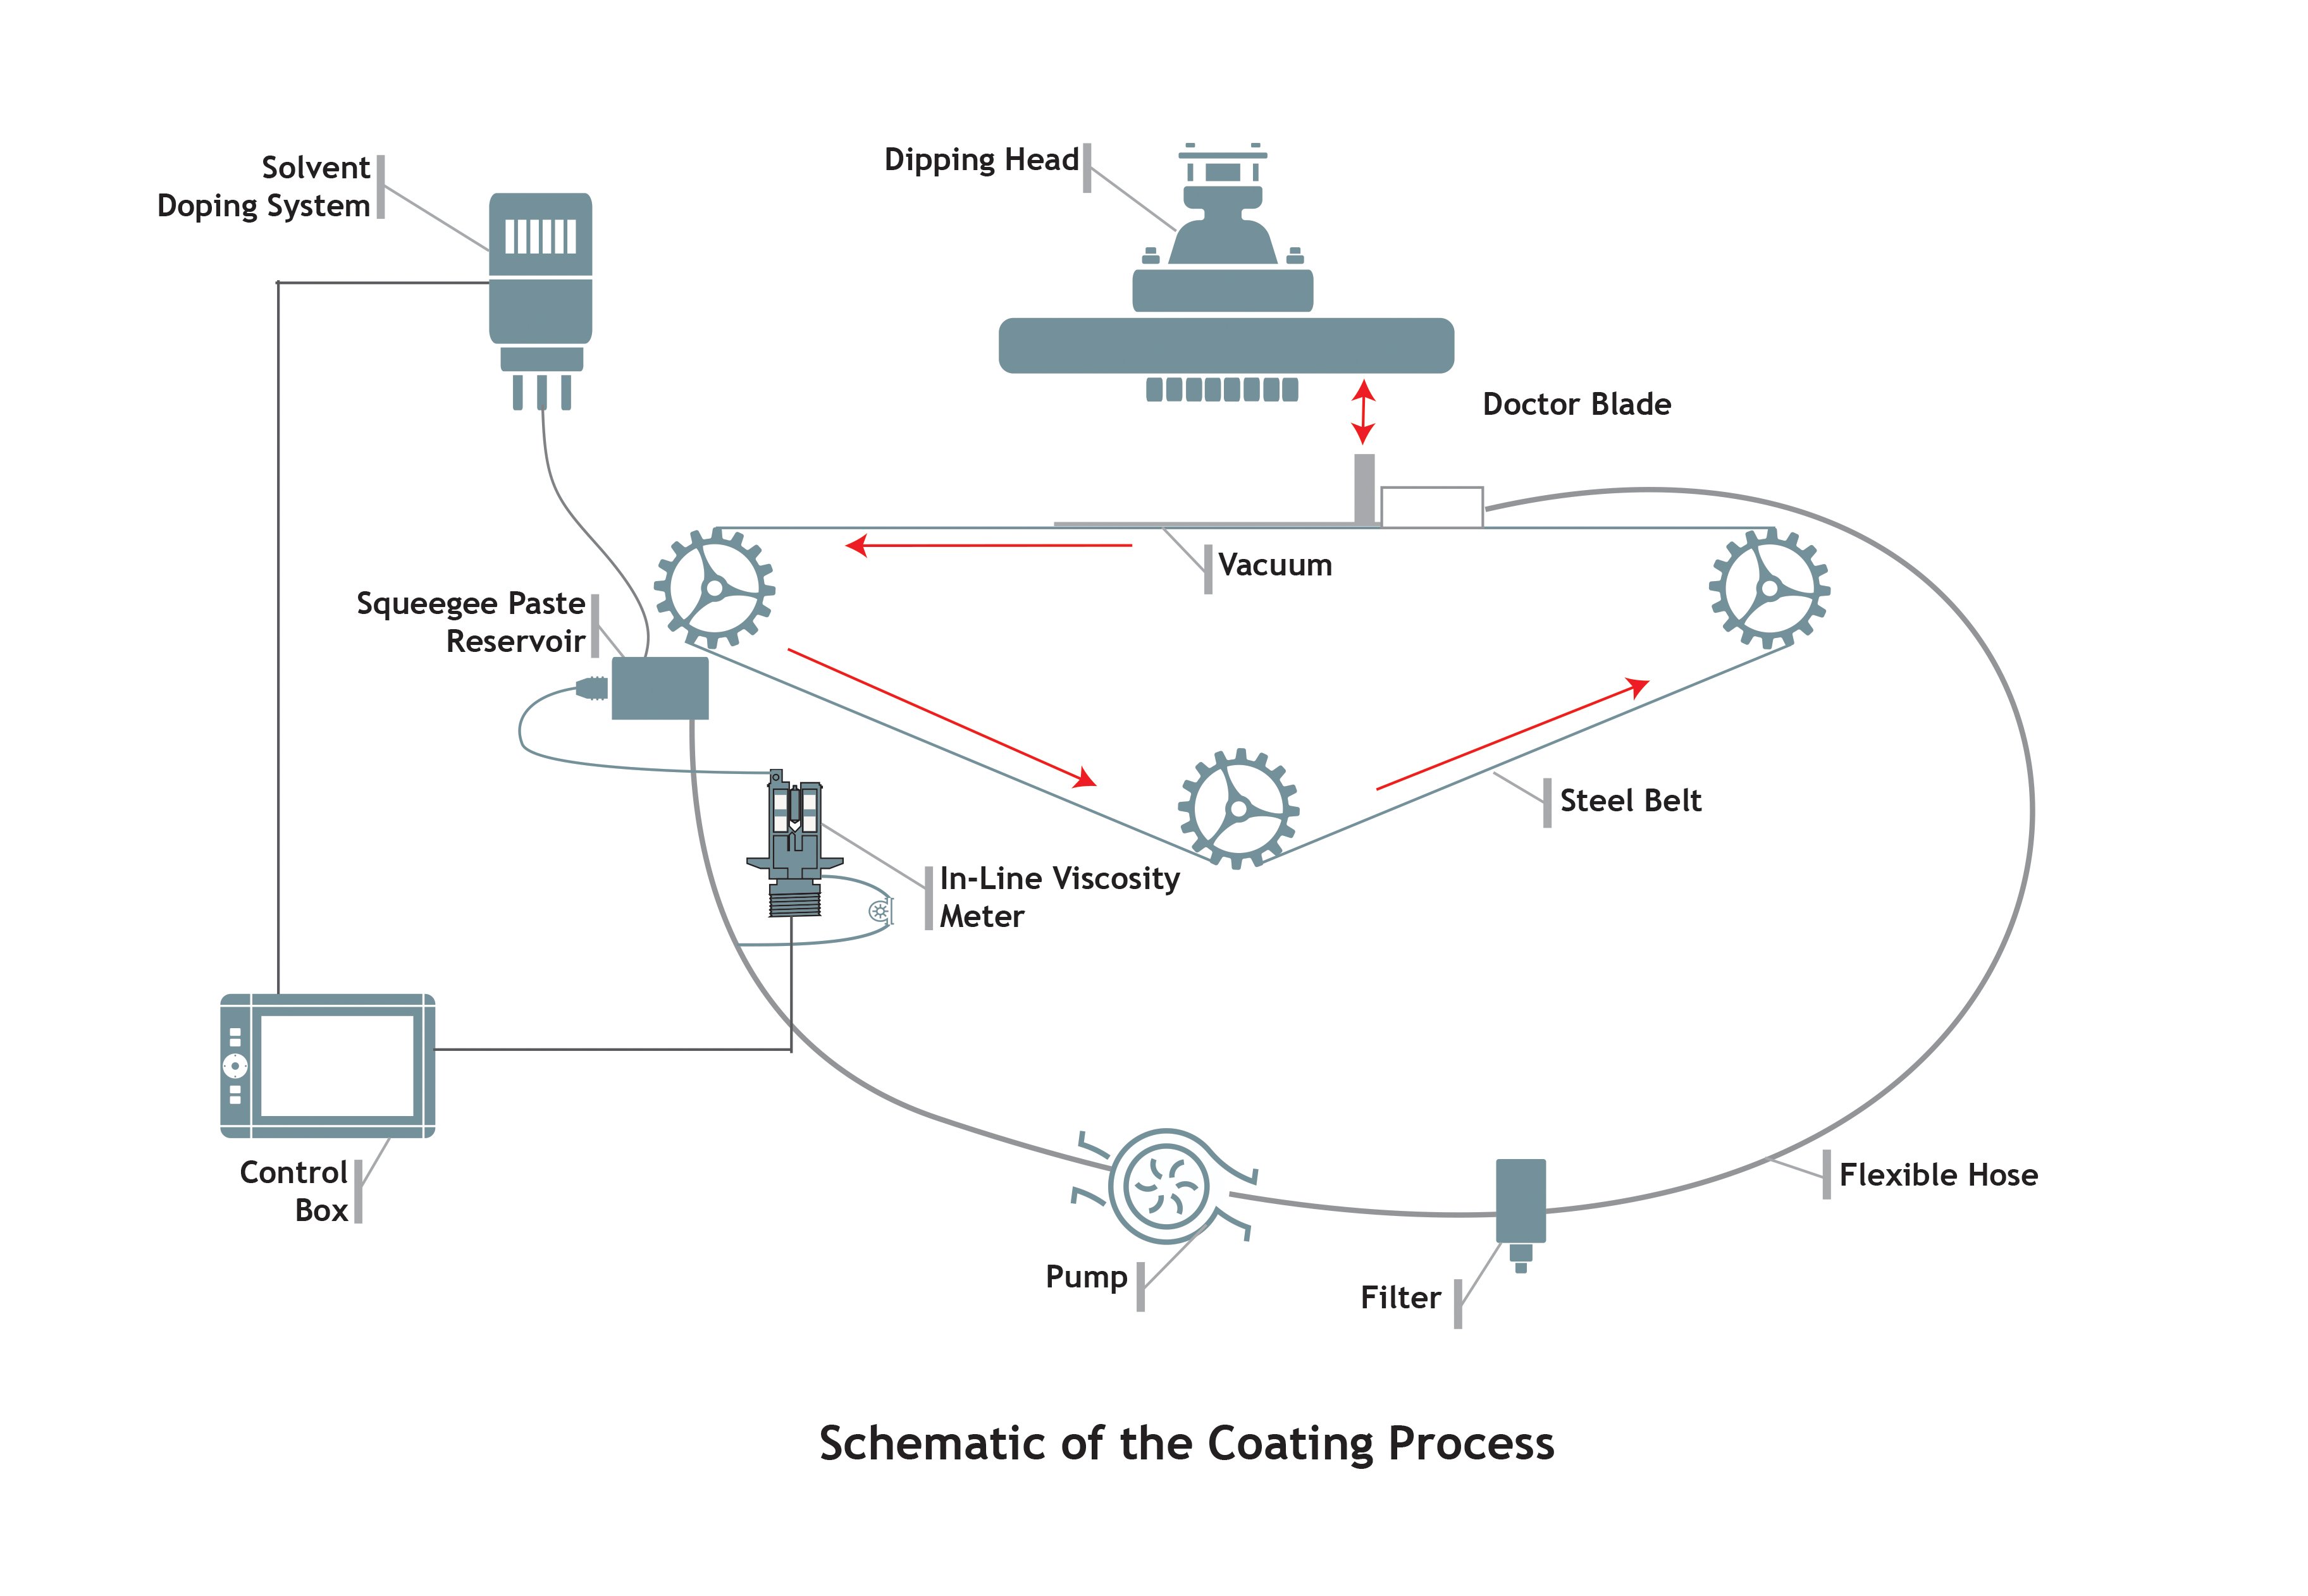 Schematic of Coating Process